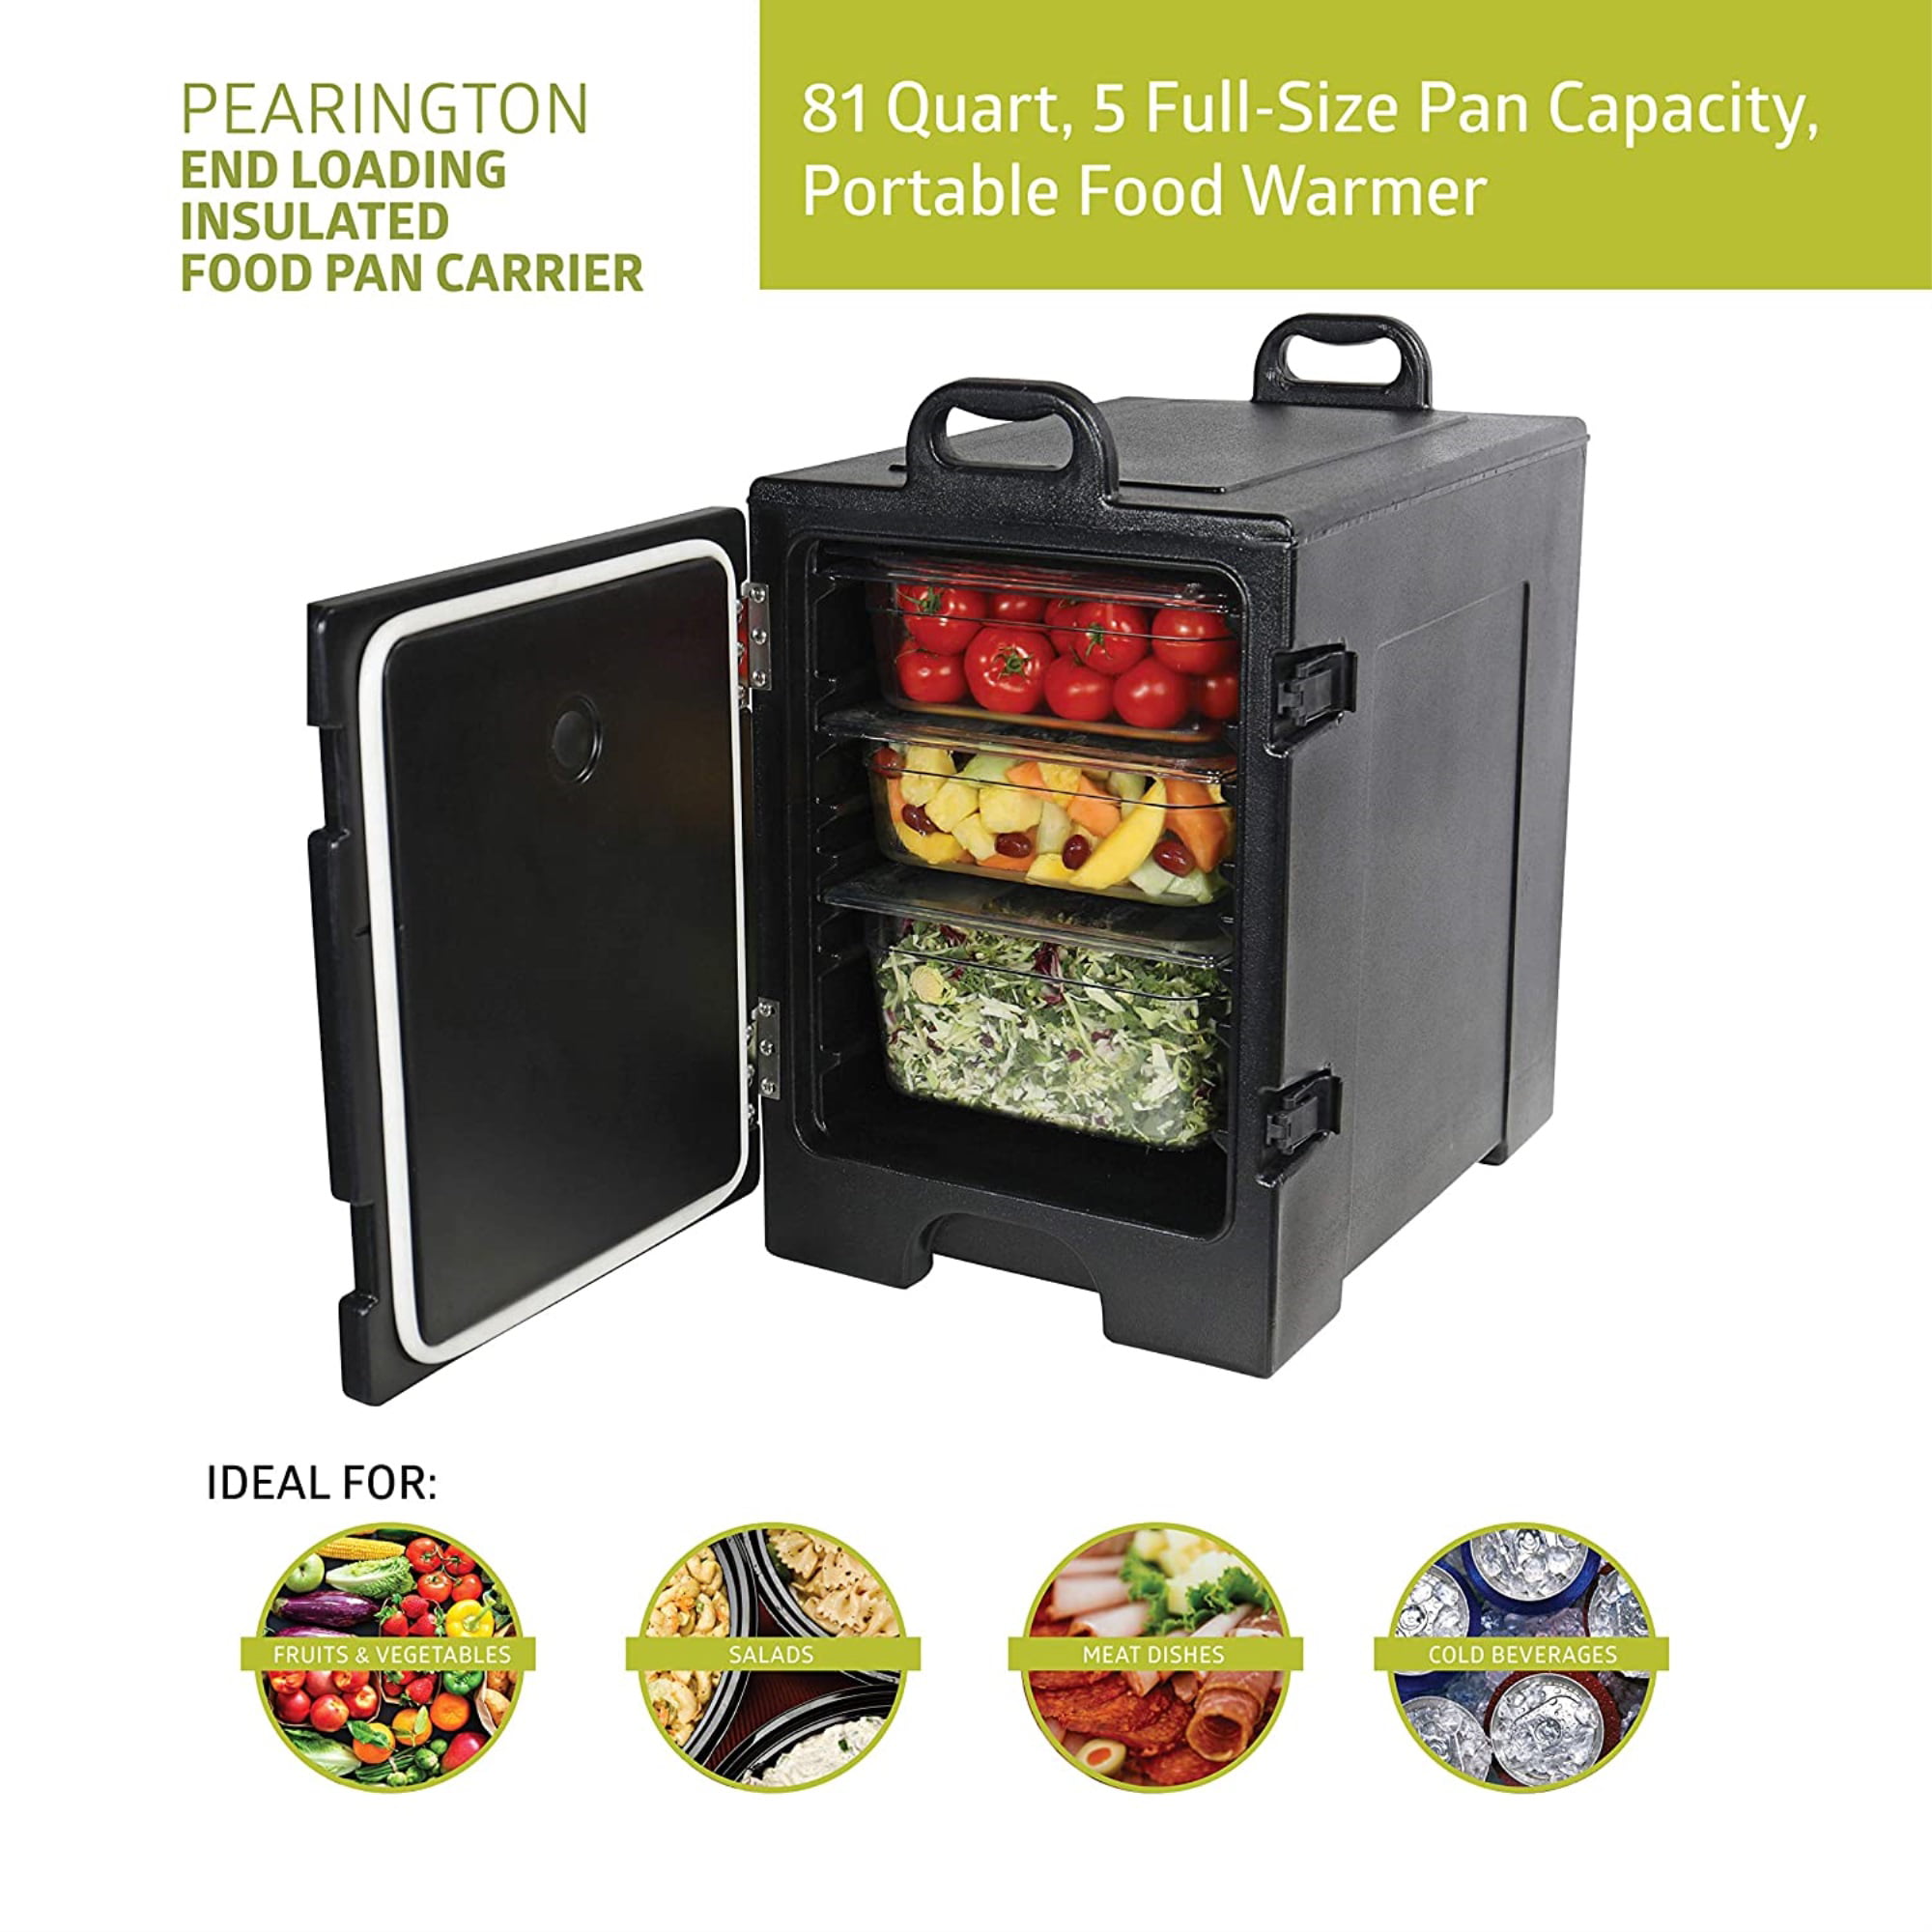 81 Quart Capacity End-loading Insulated Food Pan Carrier with